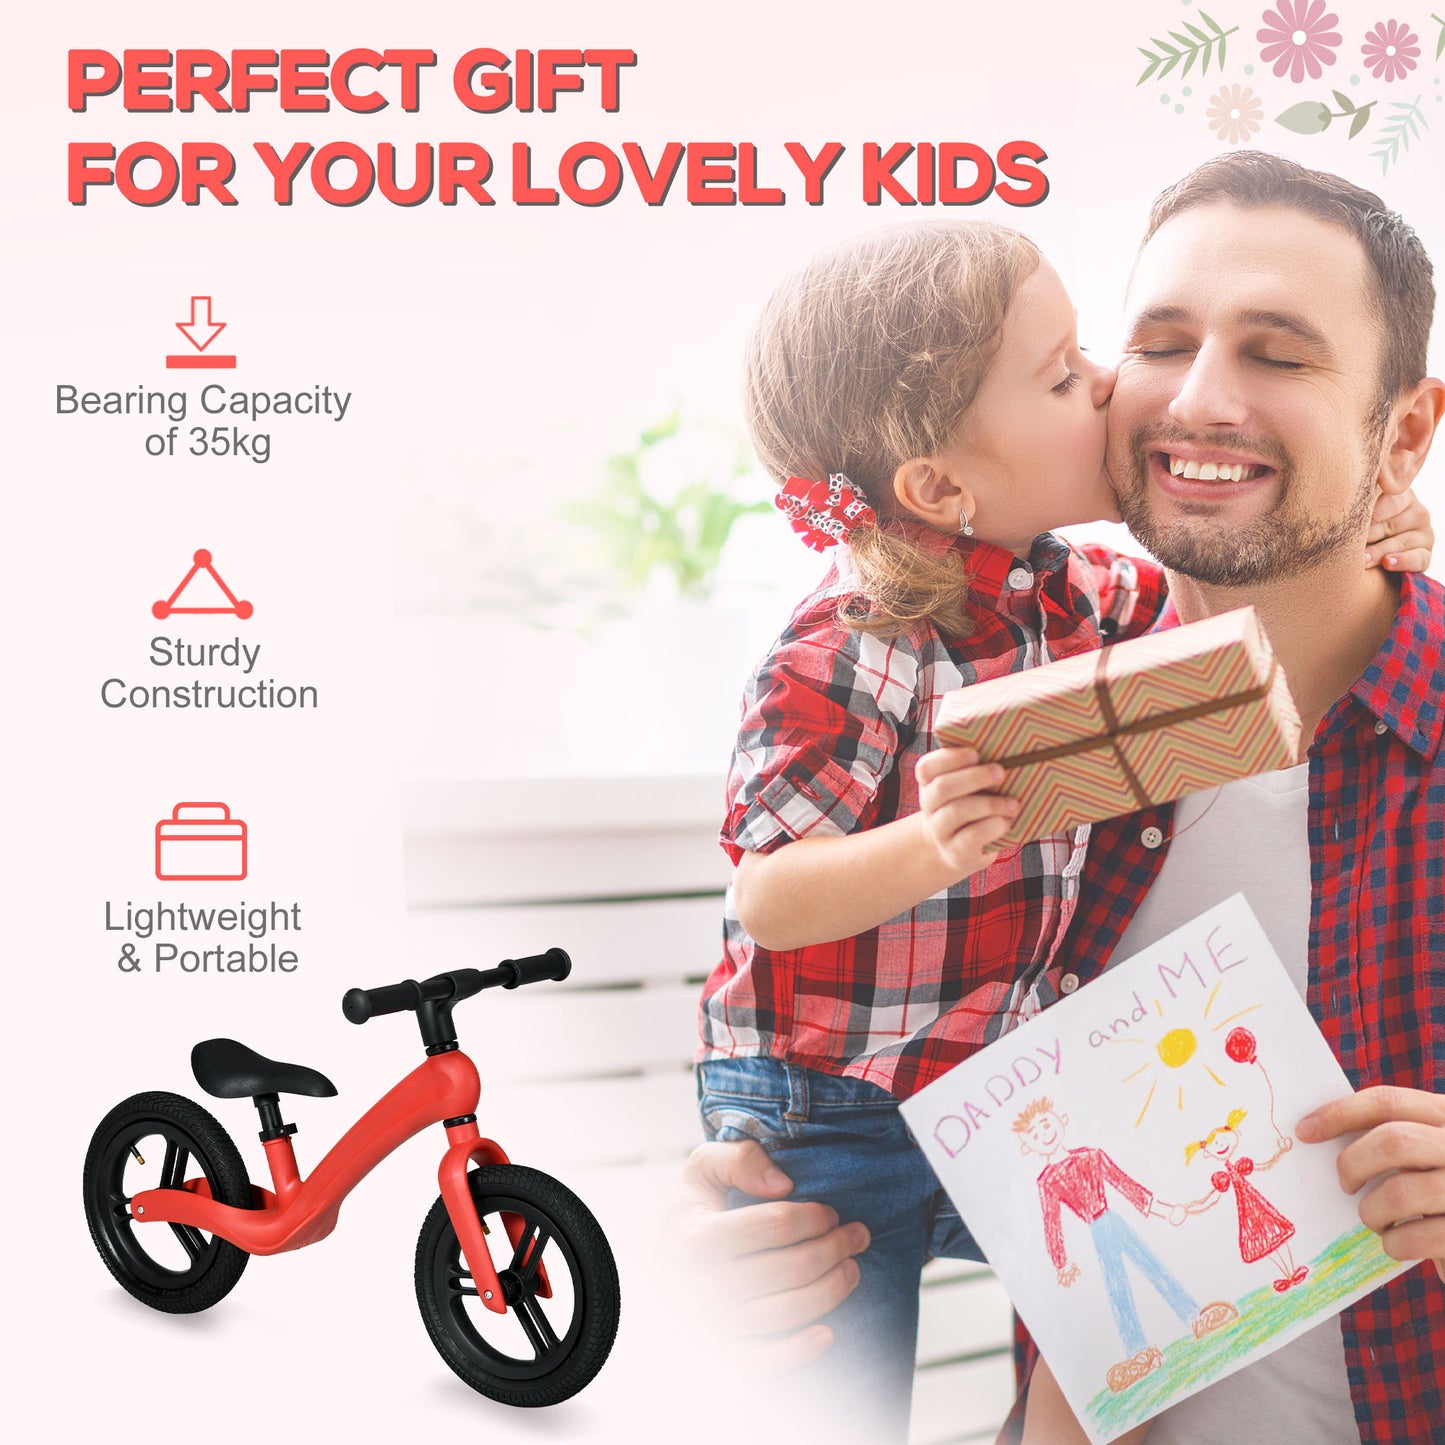 AIYAPLAY 12" Kids Balance Bike, Lightweight Training Bike for Children No Pedal with Adjustable Seat, Rubber Wheels - Red